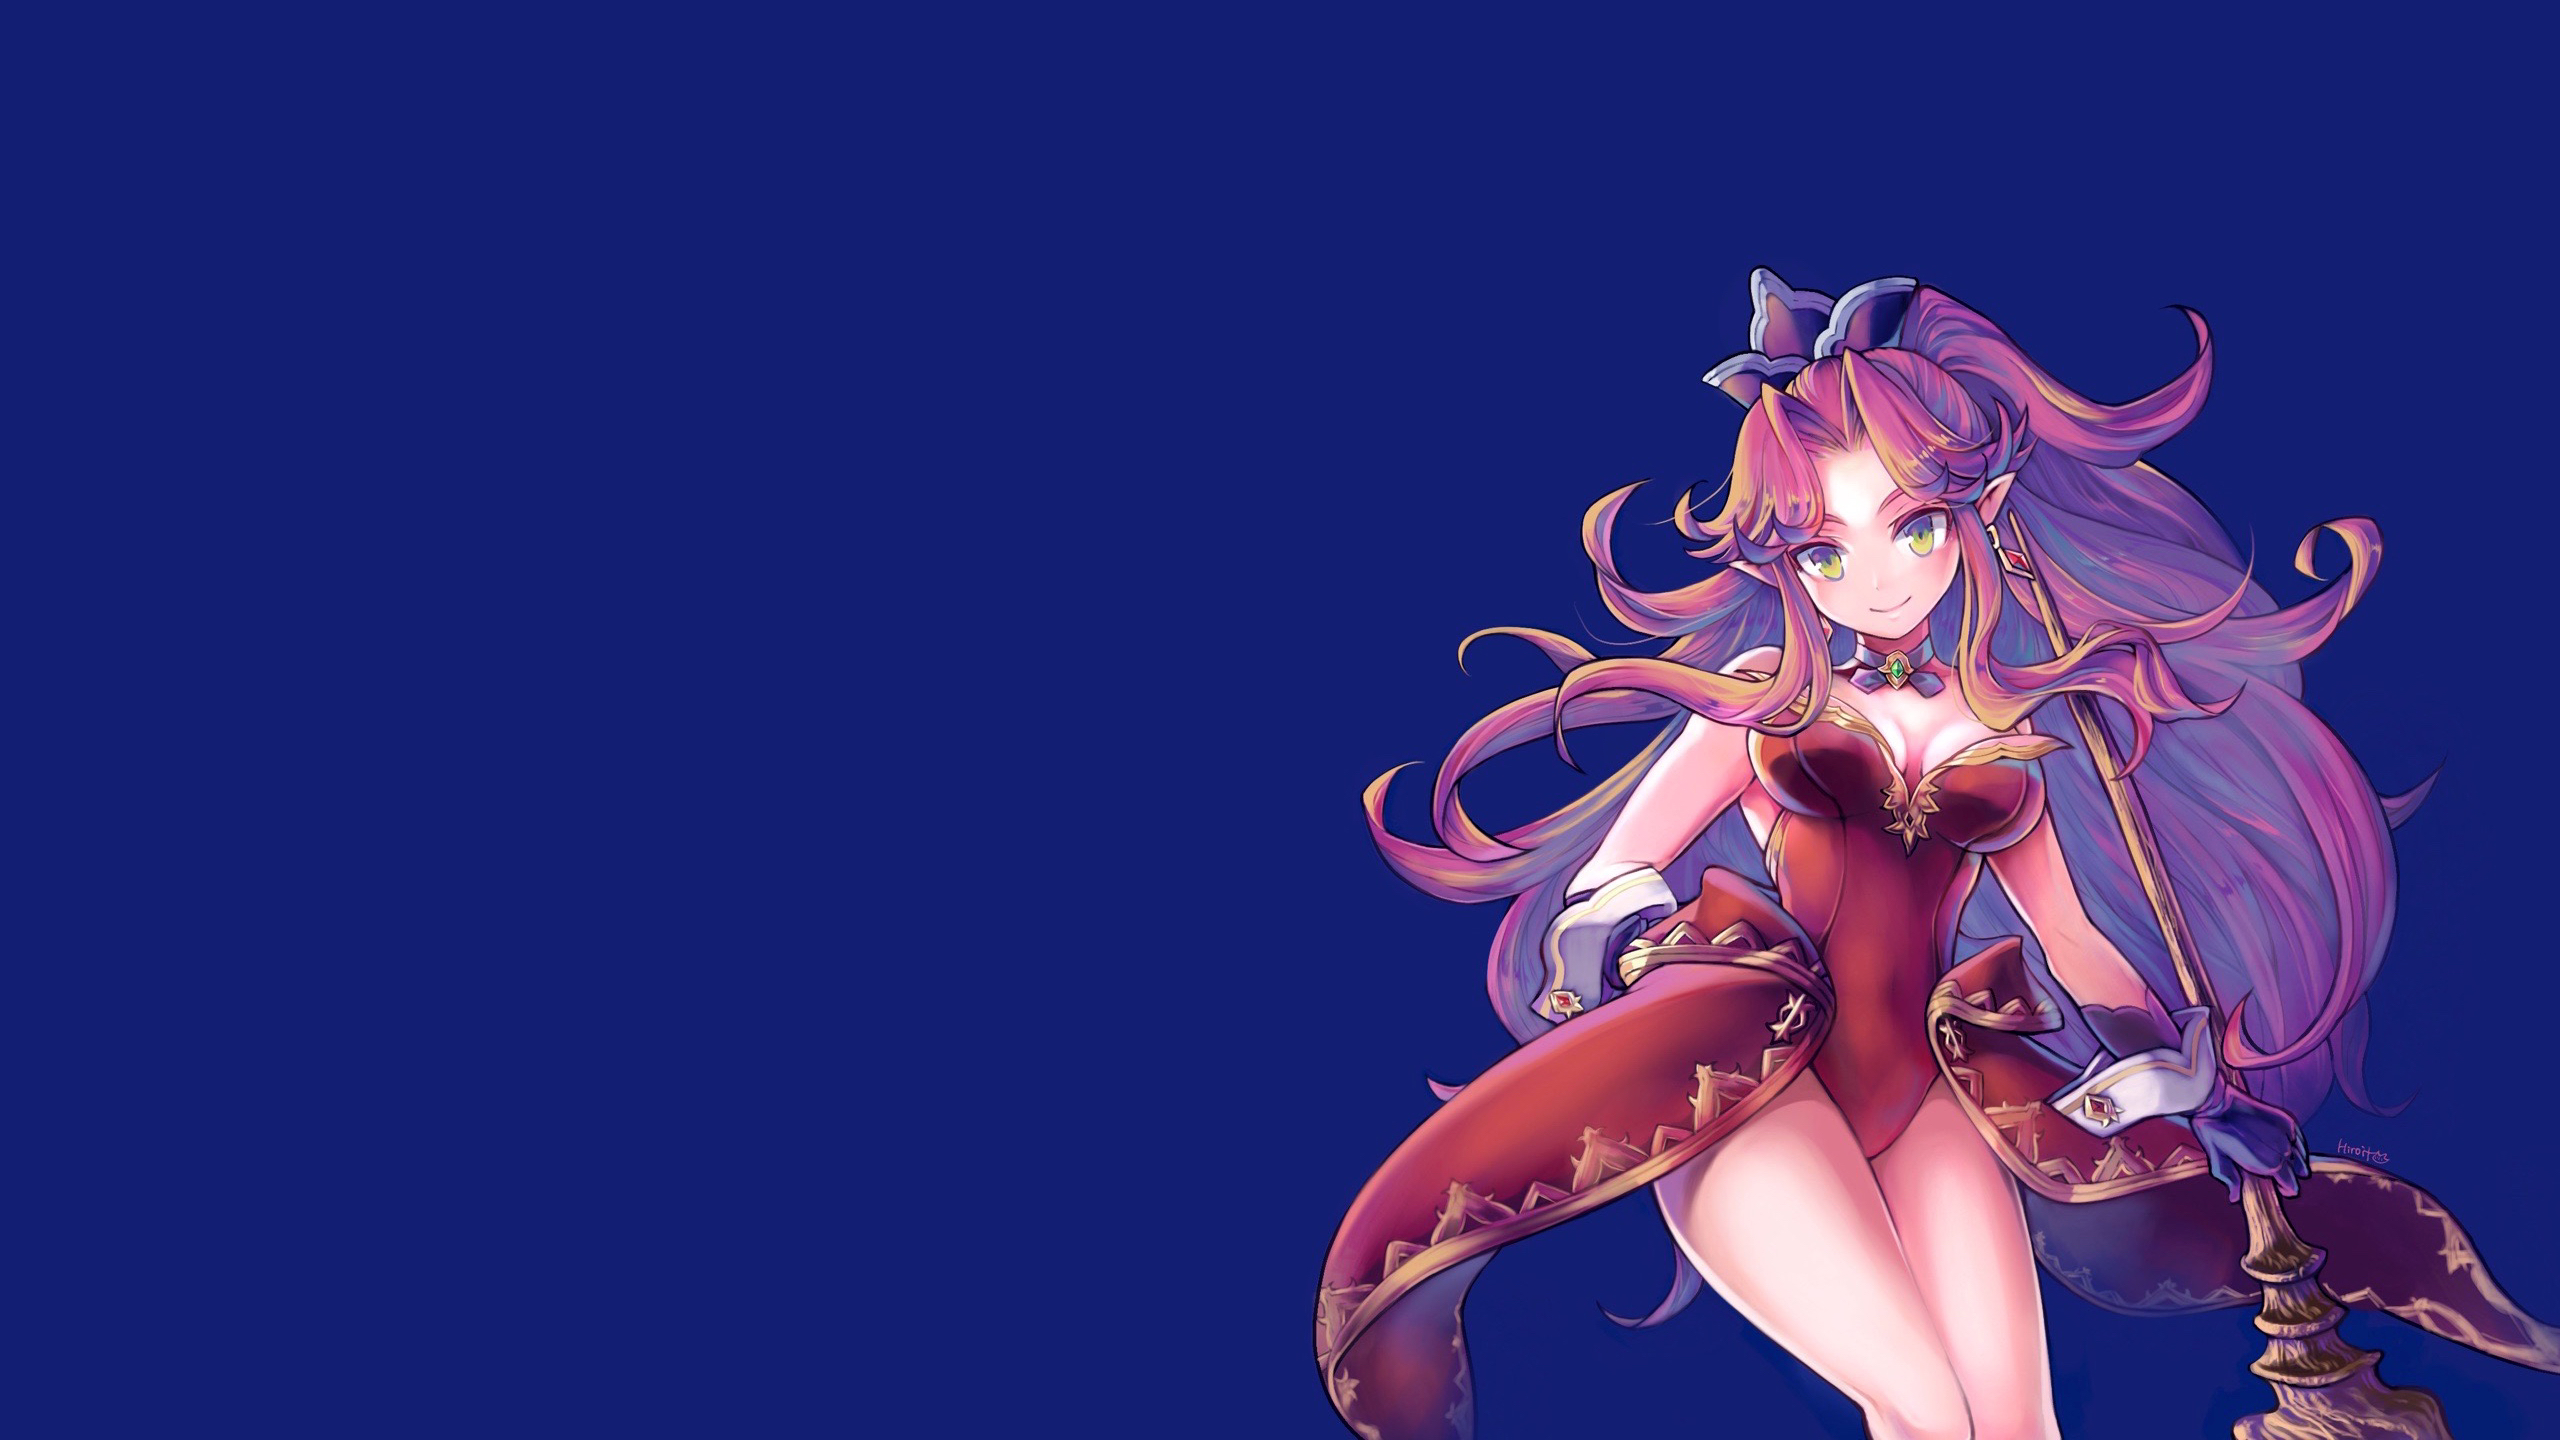 Anime 2560x1440 Angela (Trials of Mana) Trials of Mana video games video game girls retro games dress red dress SNES long hair staff purple hair pink hair gradient hair simple background crown bangs cleavage corset weapon magician sorceress witch green eyes choker jewel jewelry thighs thighs together cuffs sleeveless cuffs smiling looking at viewer blue background